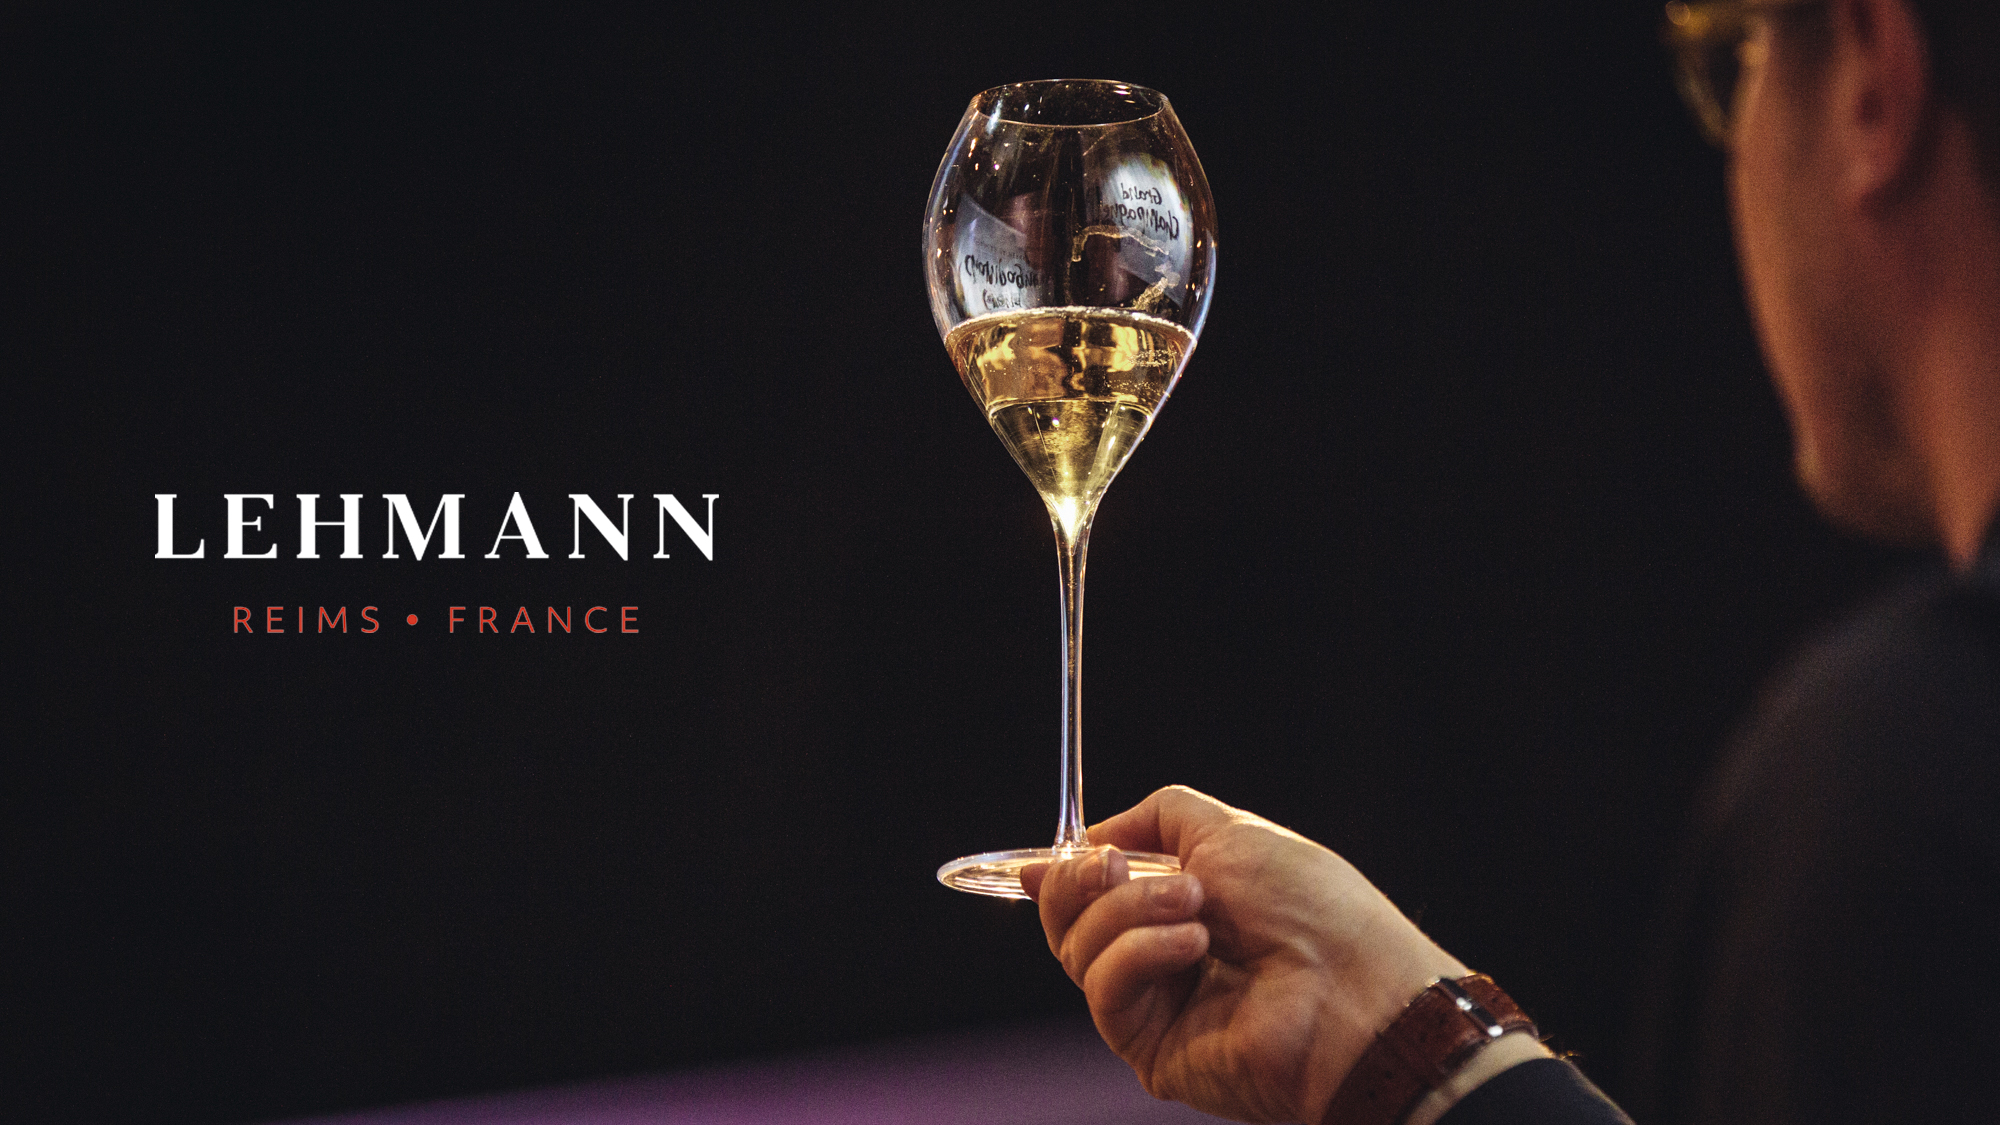 Lehmann Reims Grand Champagne Glass in black background and reflection of Grand Champagne event logo.